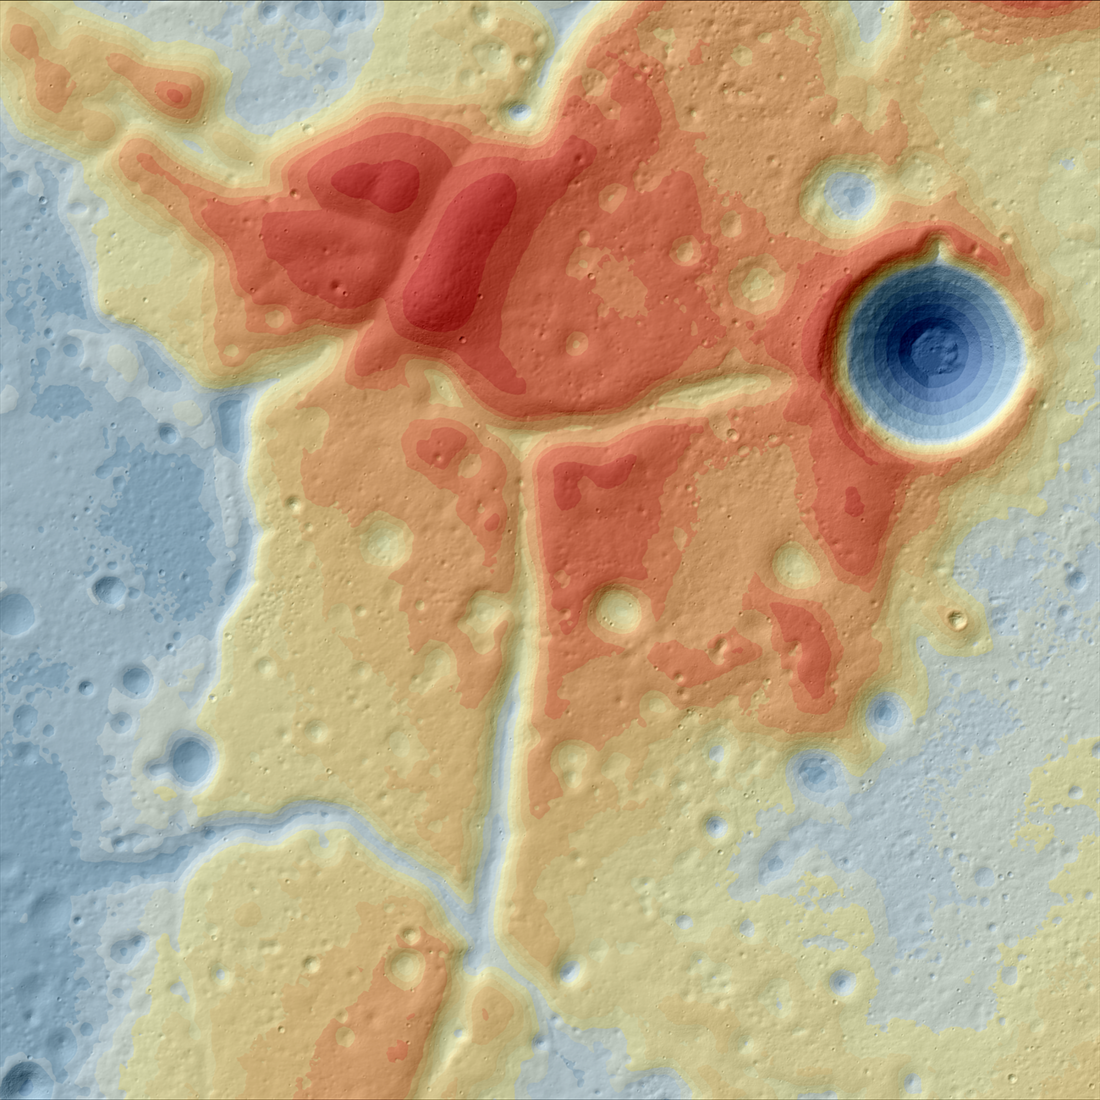 This image shows the Western Crisium Kipuka centered in the middle surrounded by the Mare Crisium. The kipuka appears as a gently-sloping raised landform in the center of the image. Shades of yellows, oranges, and reds represent different elevations of the uplifted WCK, with fractures covering the surface shaded blue. There is a crater on the eastern edge of the kipuka. North is towards the top of the page.